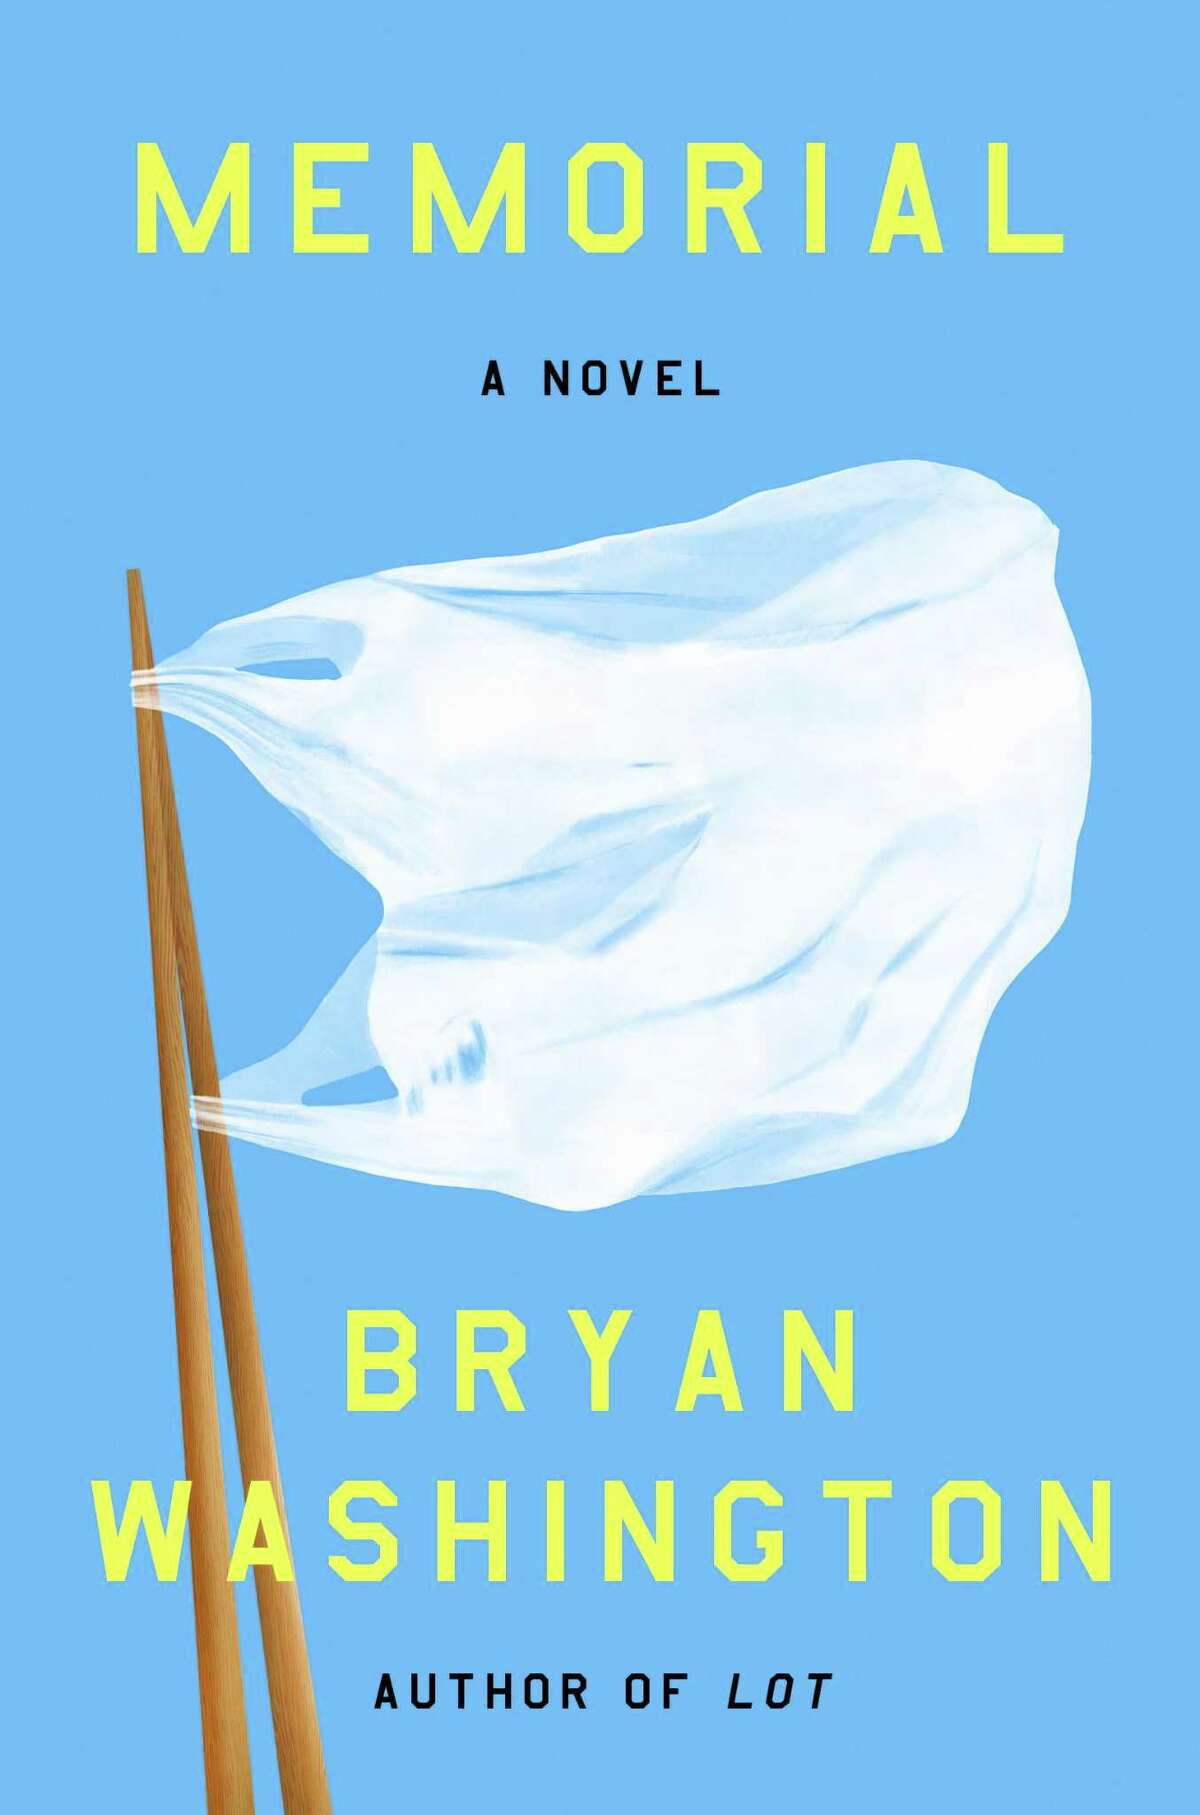 Houston writer Bryan Washington’s first novel is coming out this week and has already been optioned for a TV show.